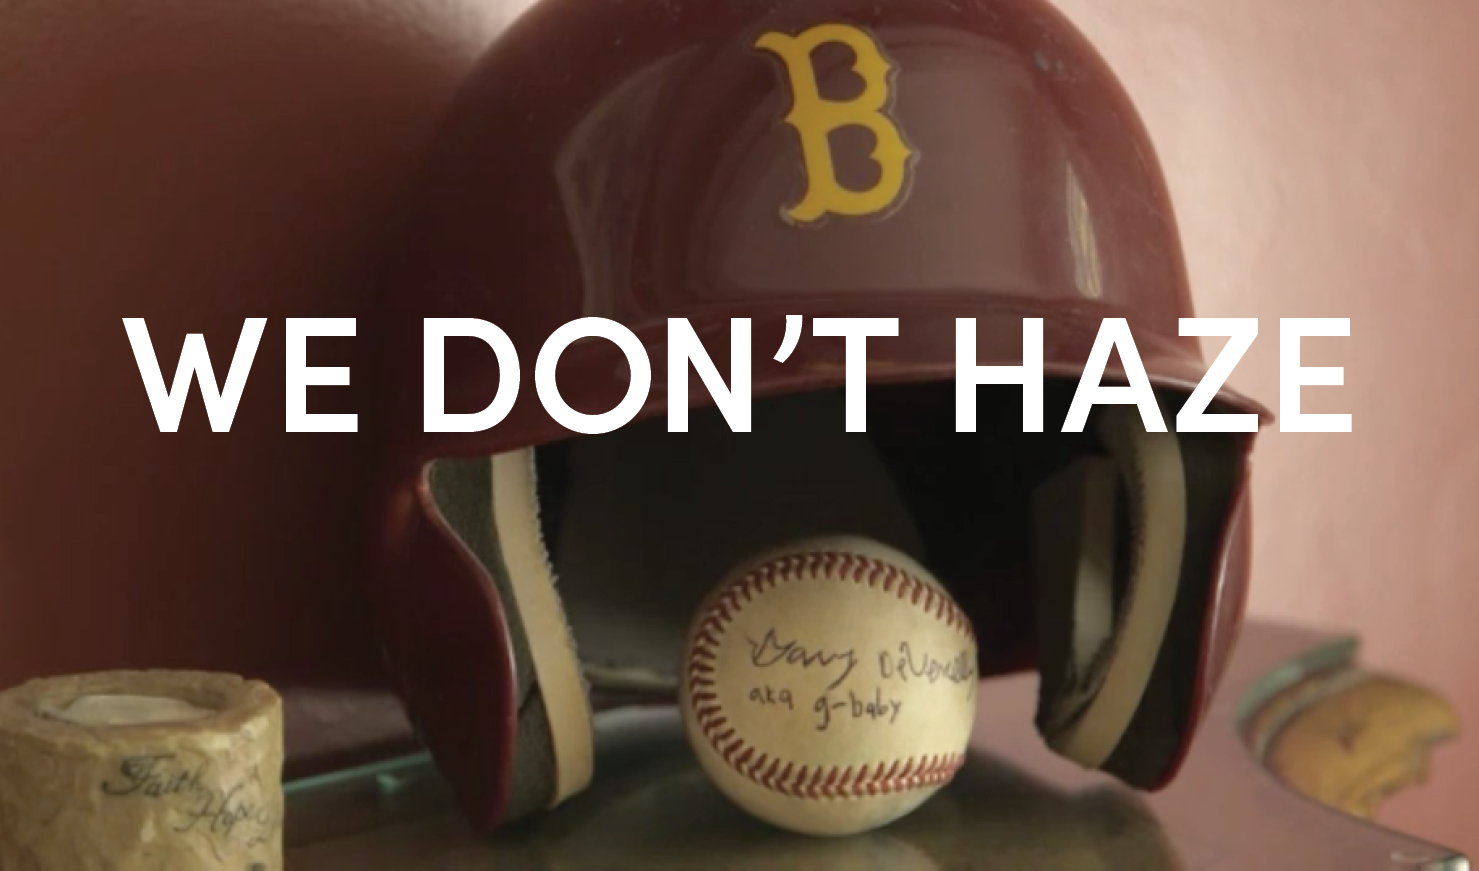 Image of a baseball helmet and ball with overlaid text, which reads "We Don't Haze"